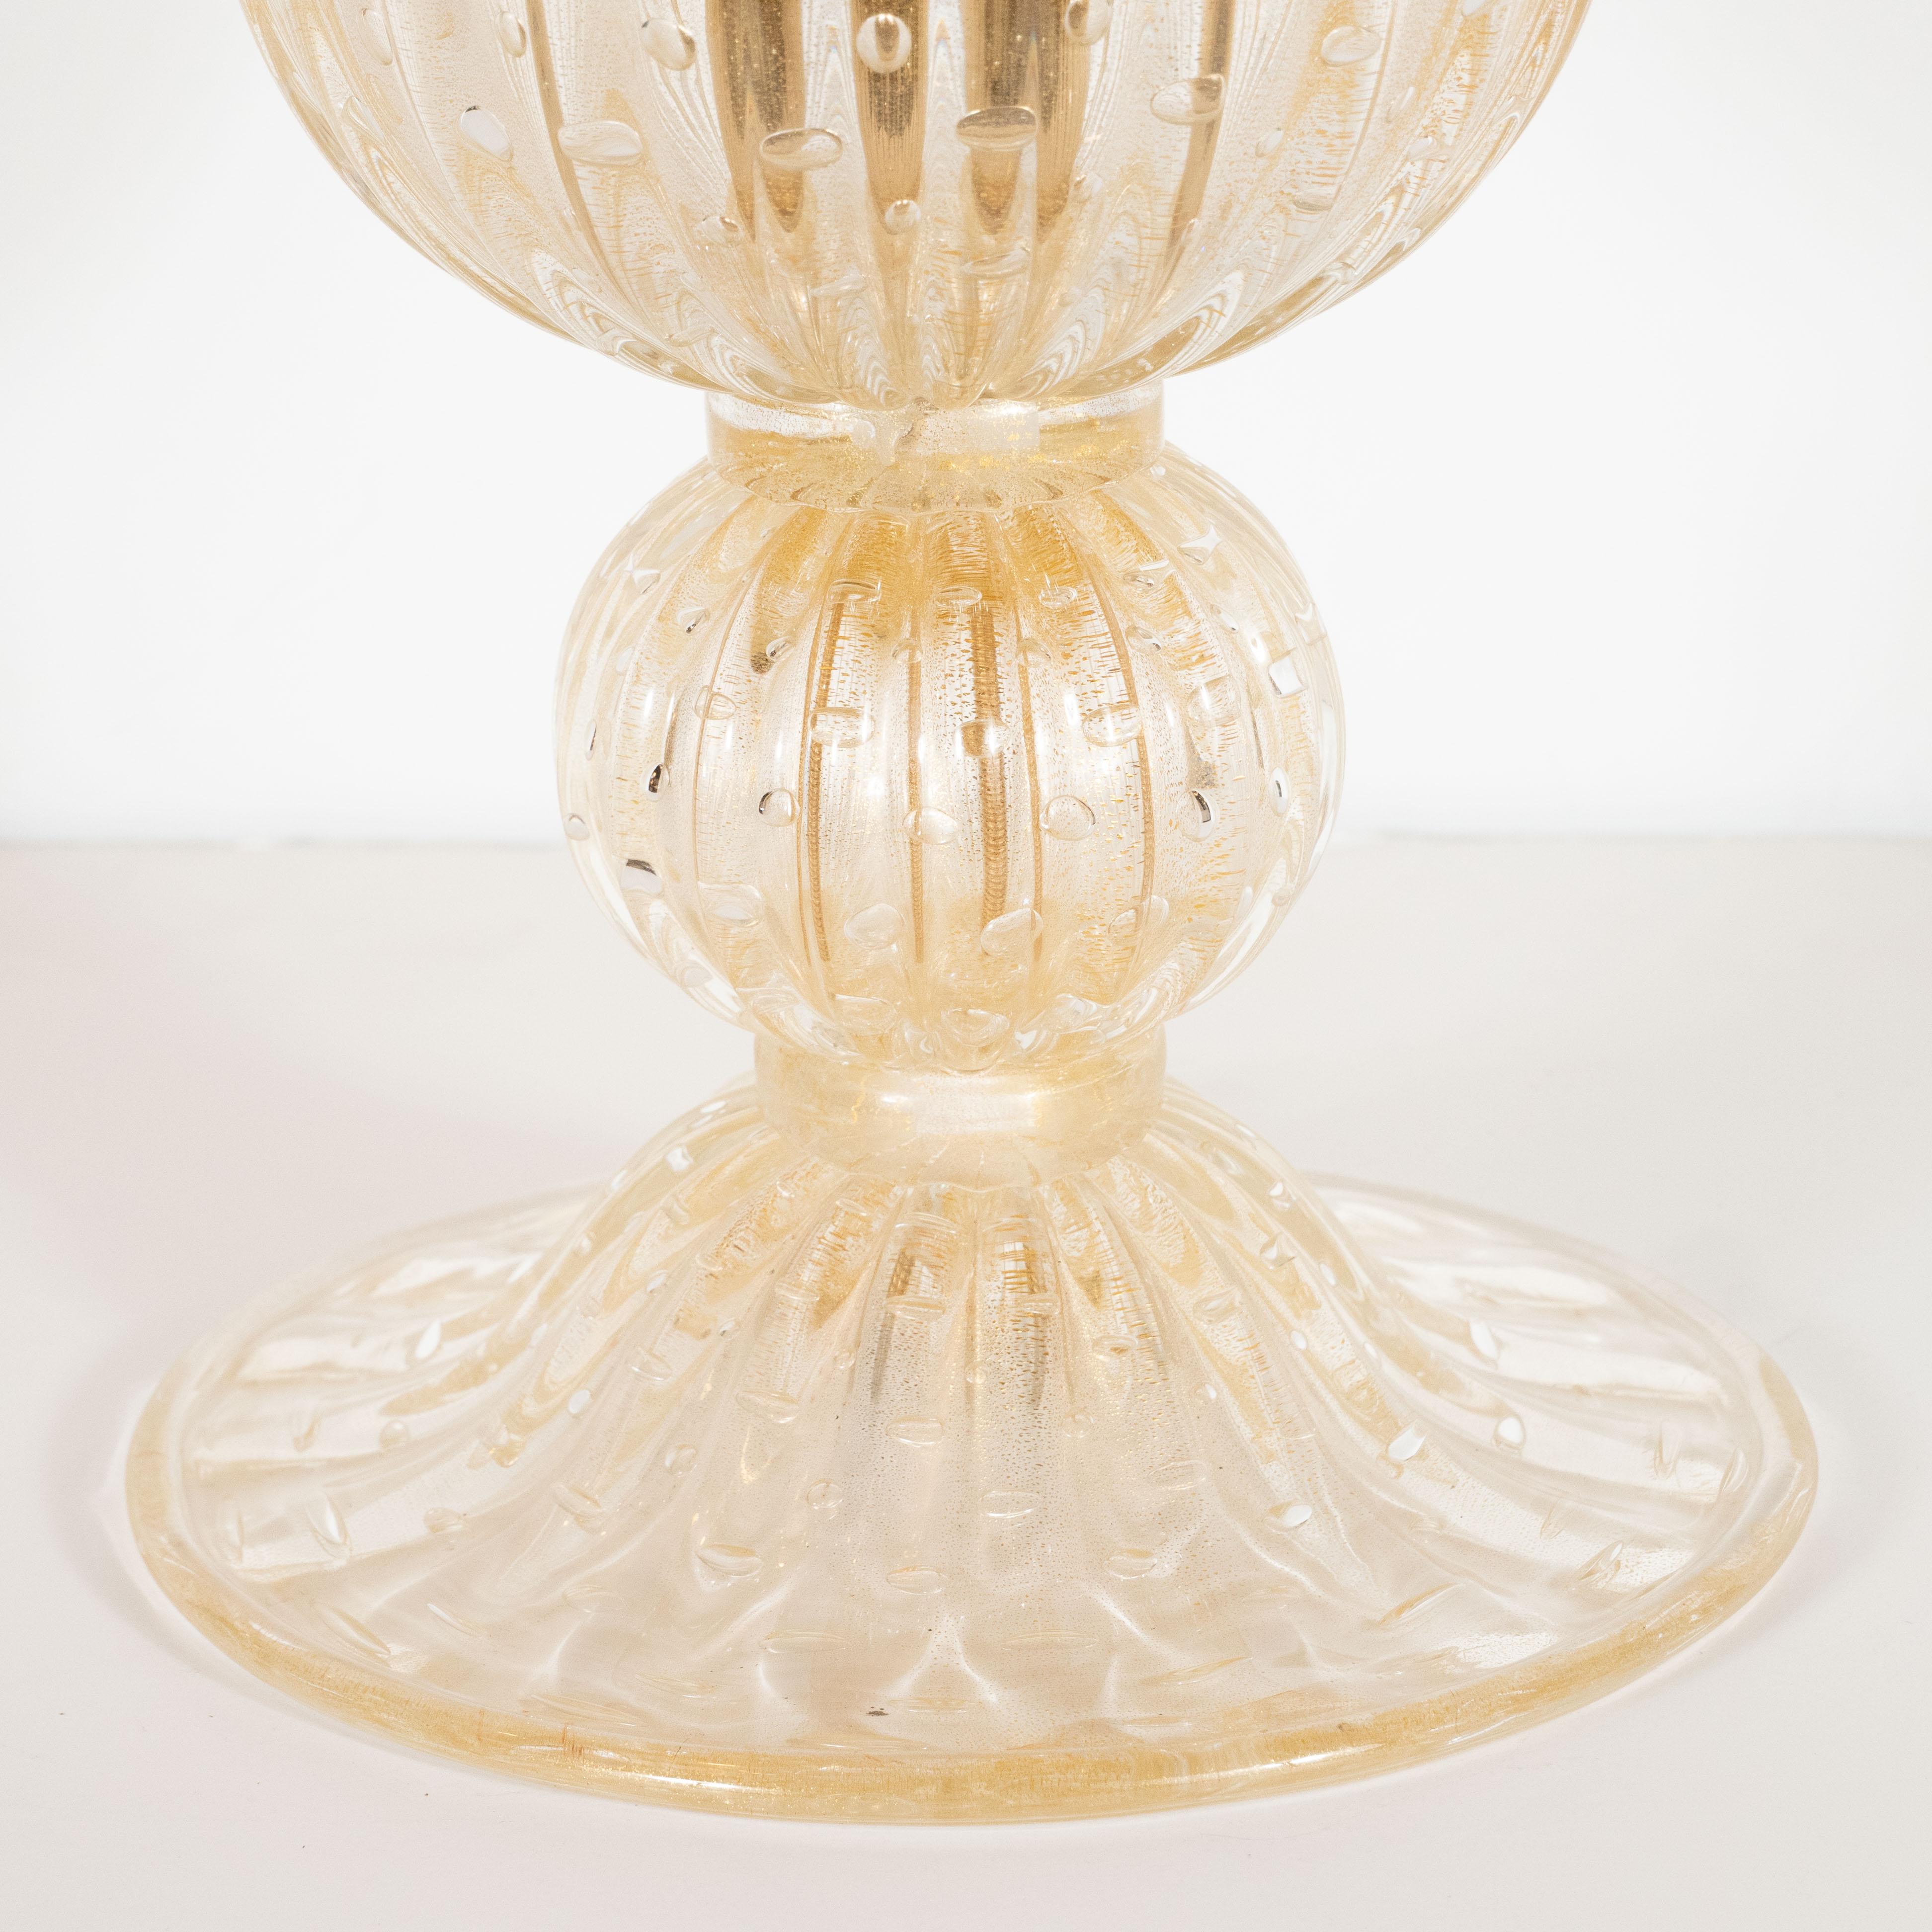 This stunning pair of uplights were handblown in Murano, Italy- the island off the coast of Venice renowned for centuries for its superlative glass production. They feature billowing urn form shades and a subtly domed base topped with an orbital